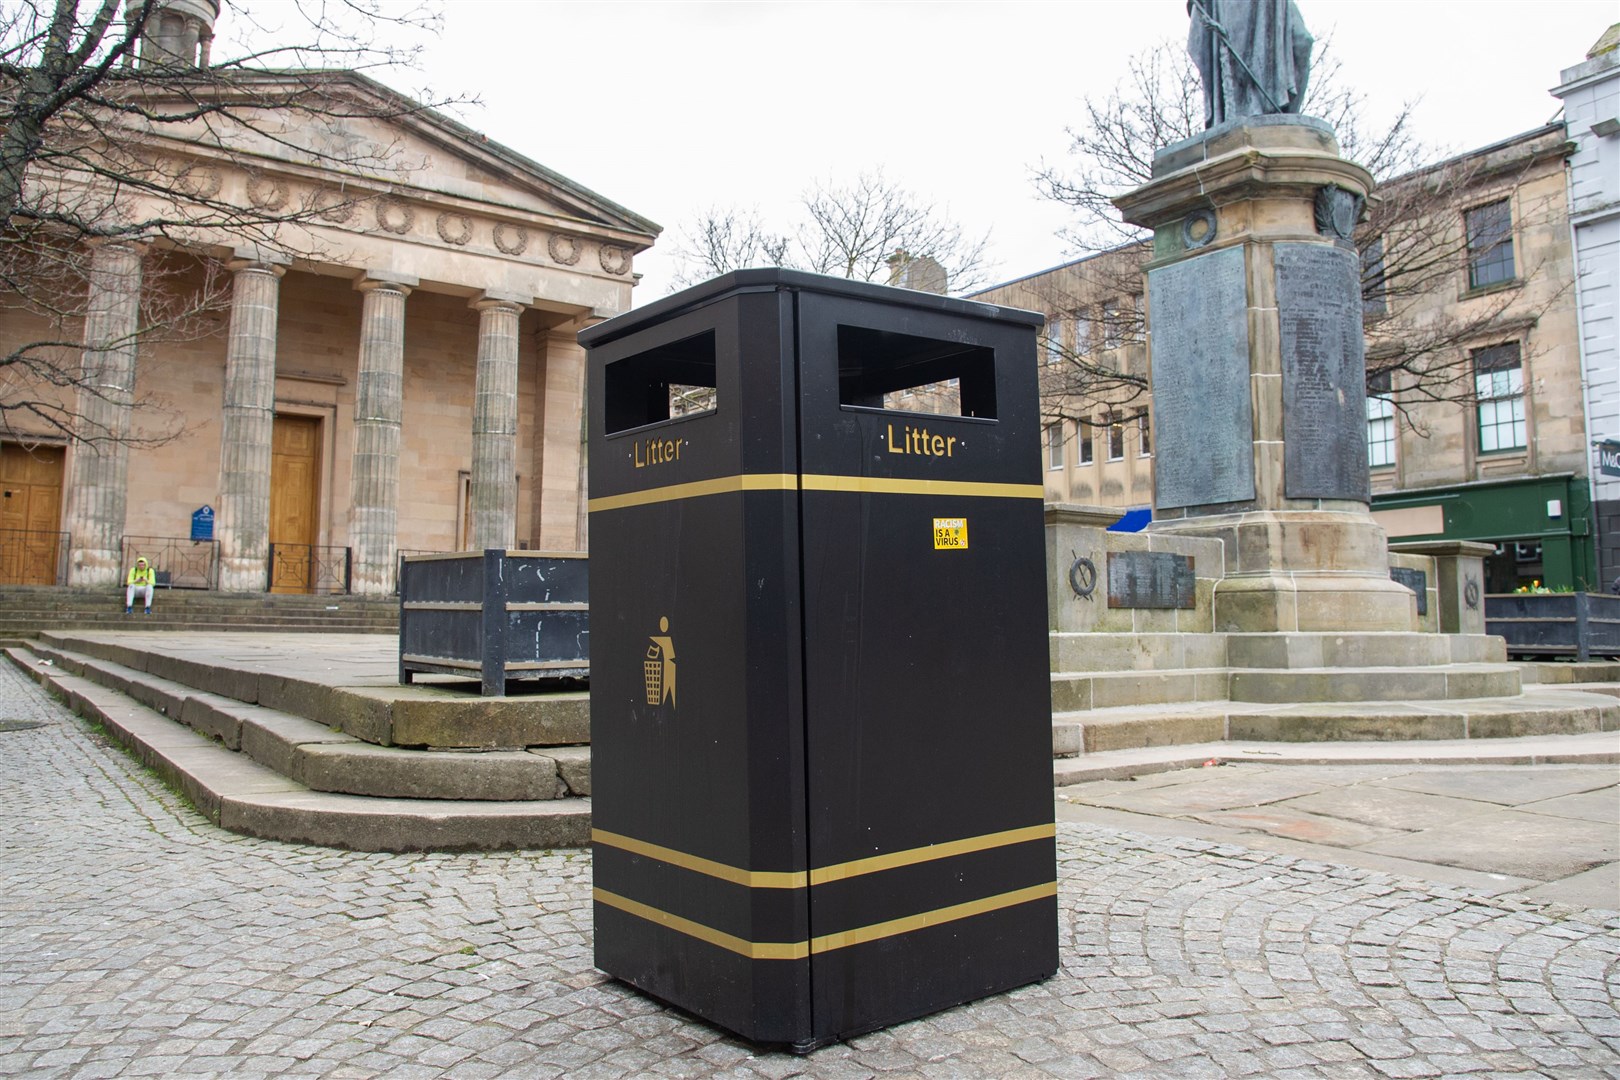 One of the bins which will be given an artistic makeover. Picture: Daniel Forsyth